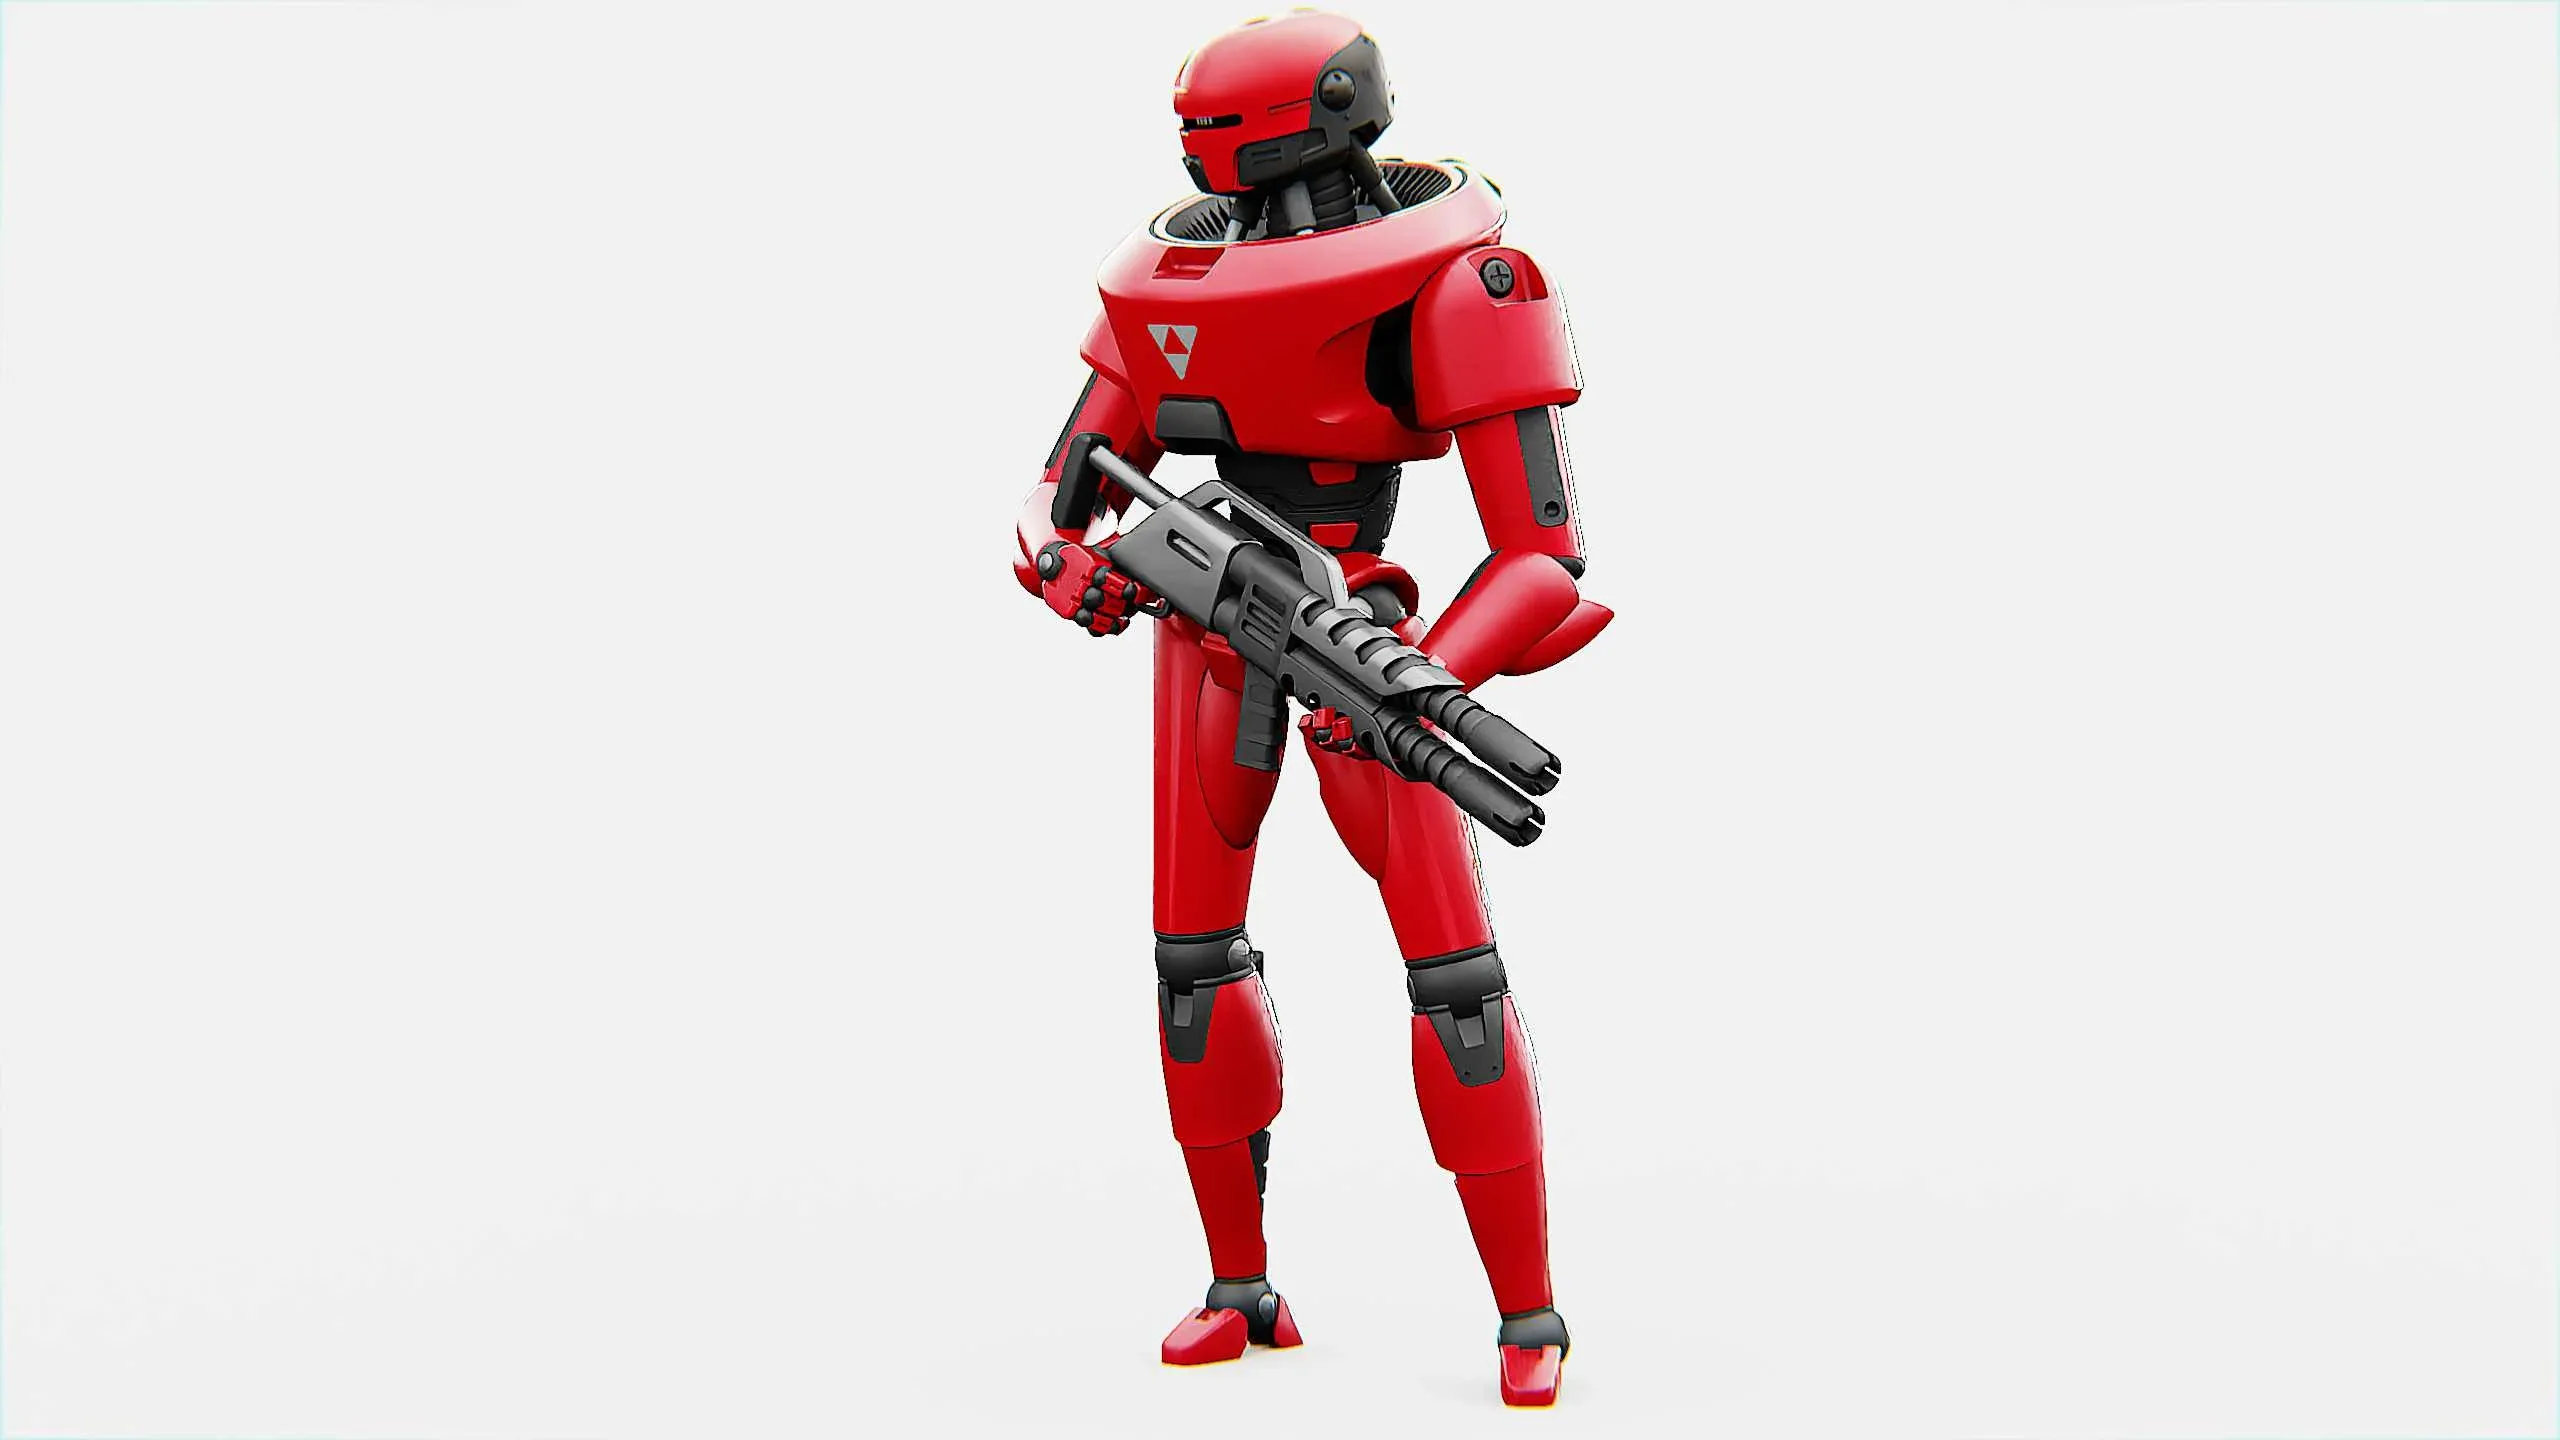 Mars Colony Trooper X-3000 Auto-Rig Pro Rigged For Mixamo, Unreal Engine Unity